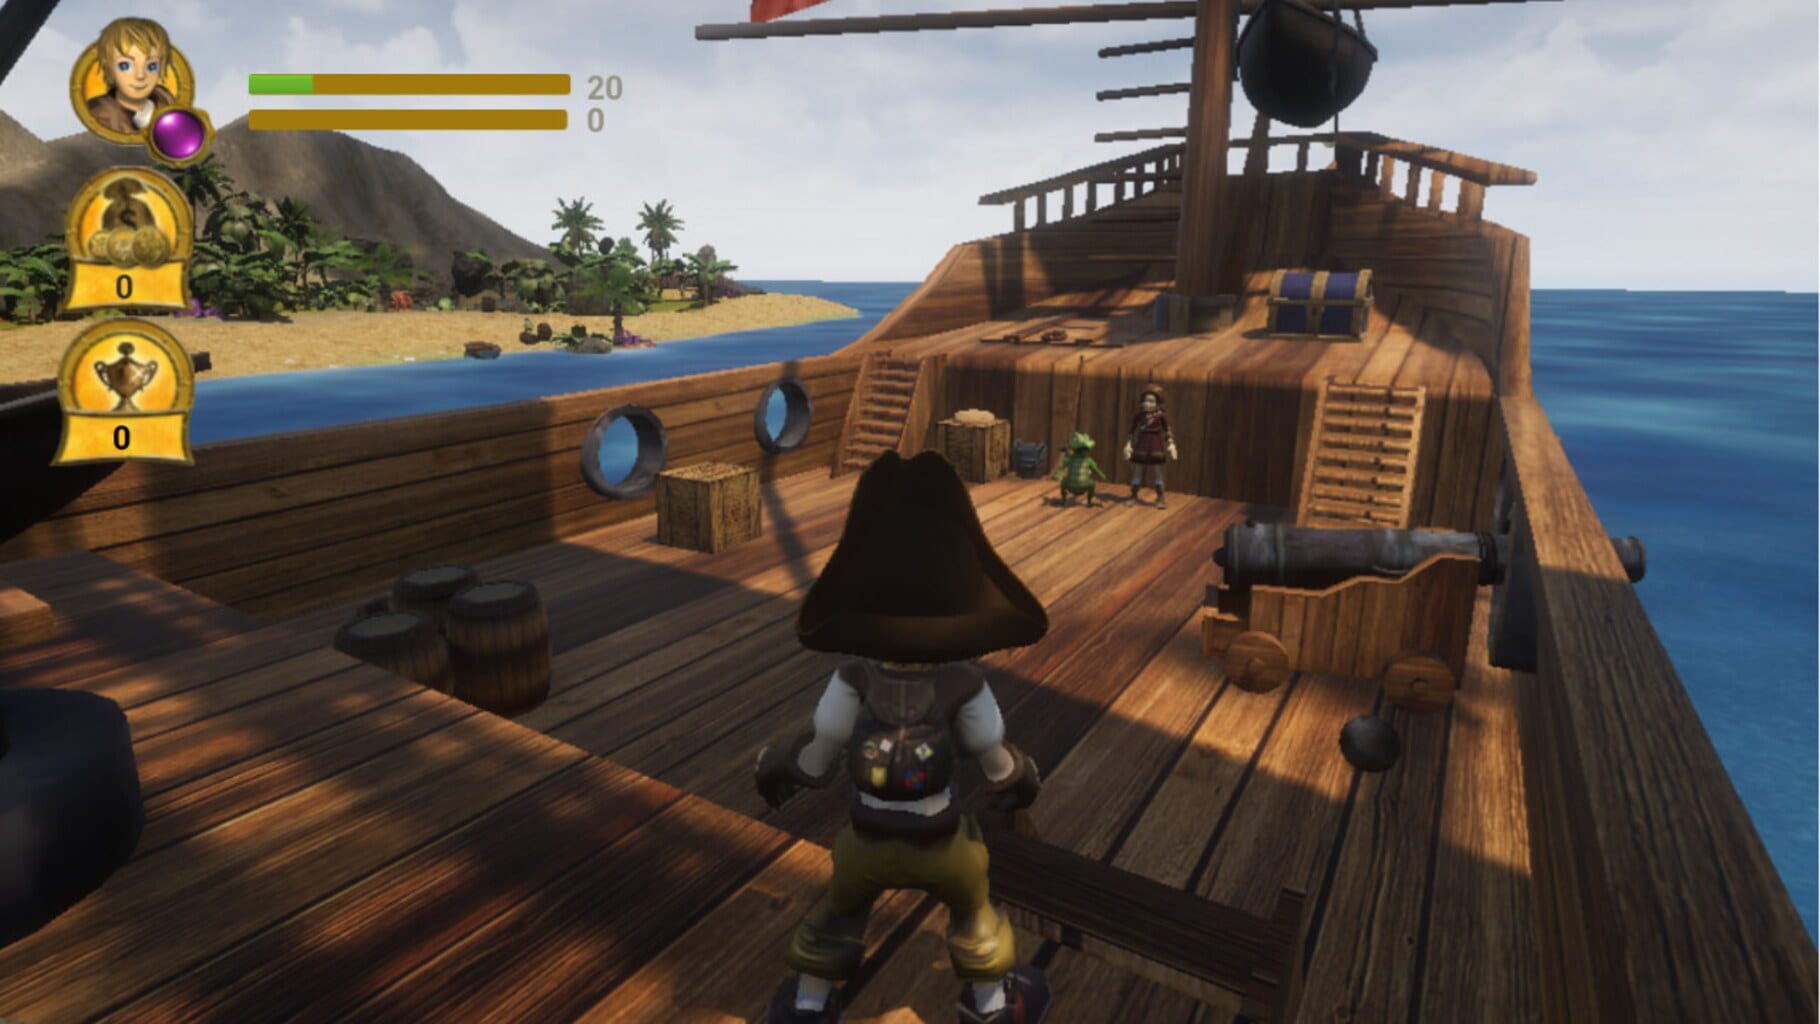 2weistein: The Curse of the Red Dragon 3 - Ronger Pirates screenshot